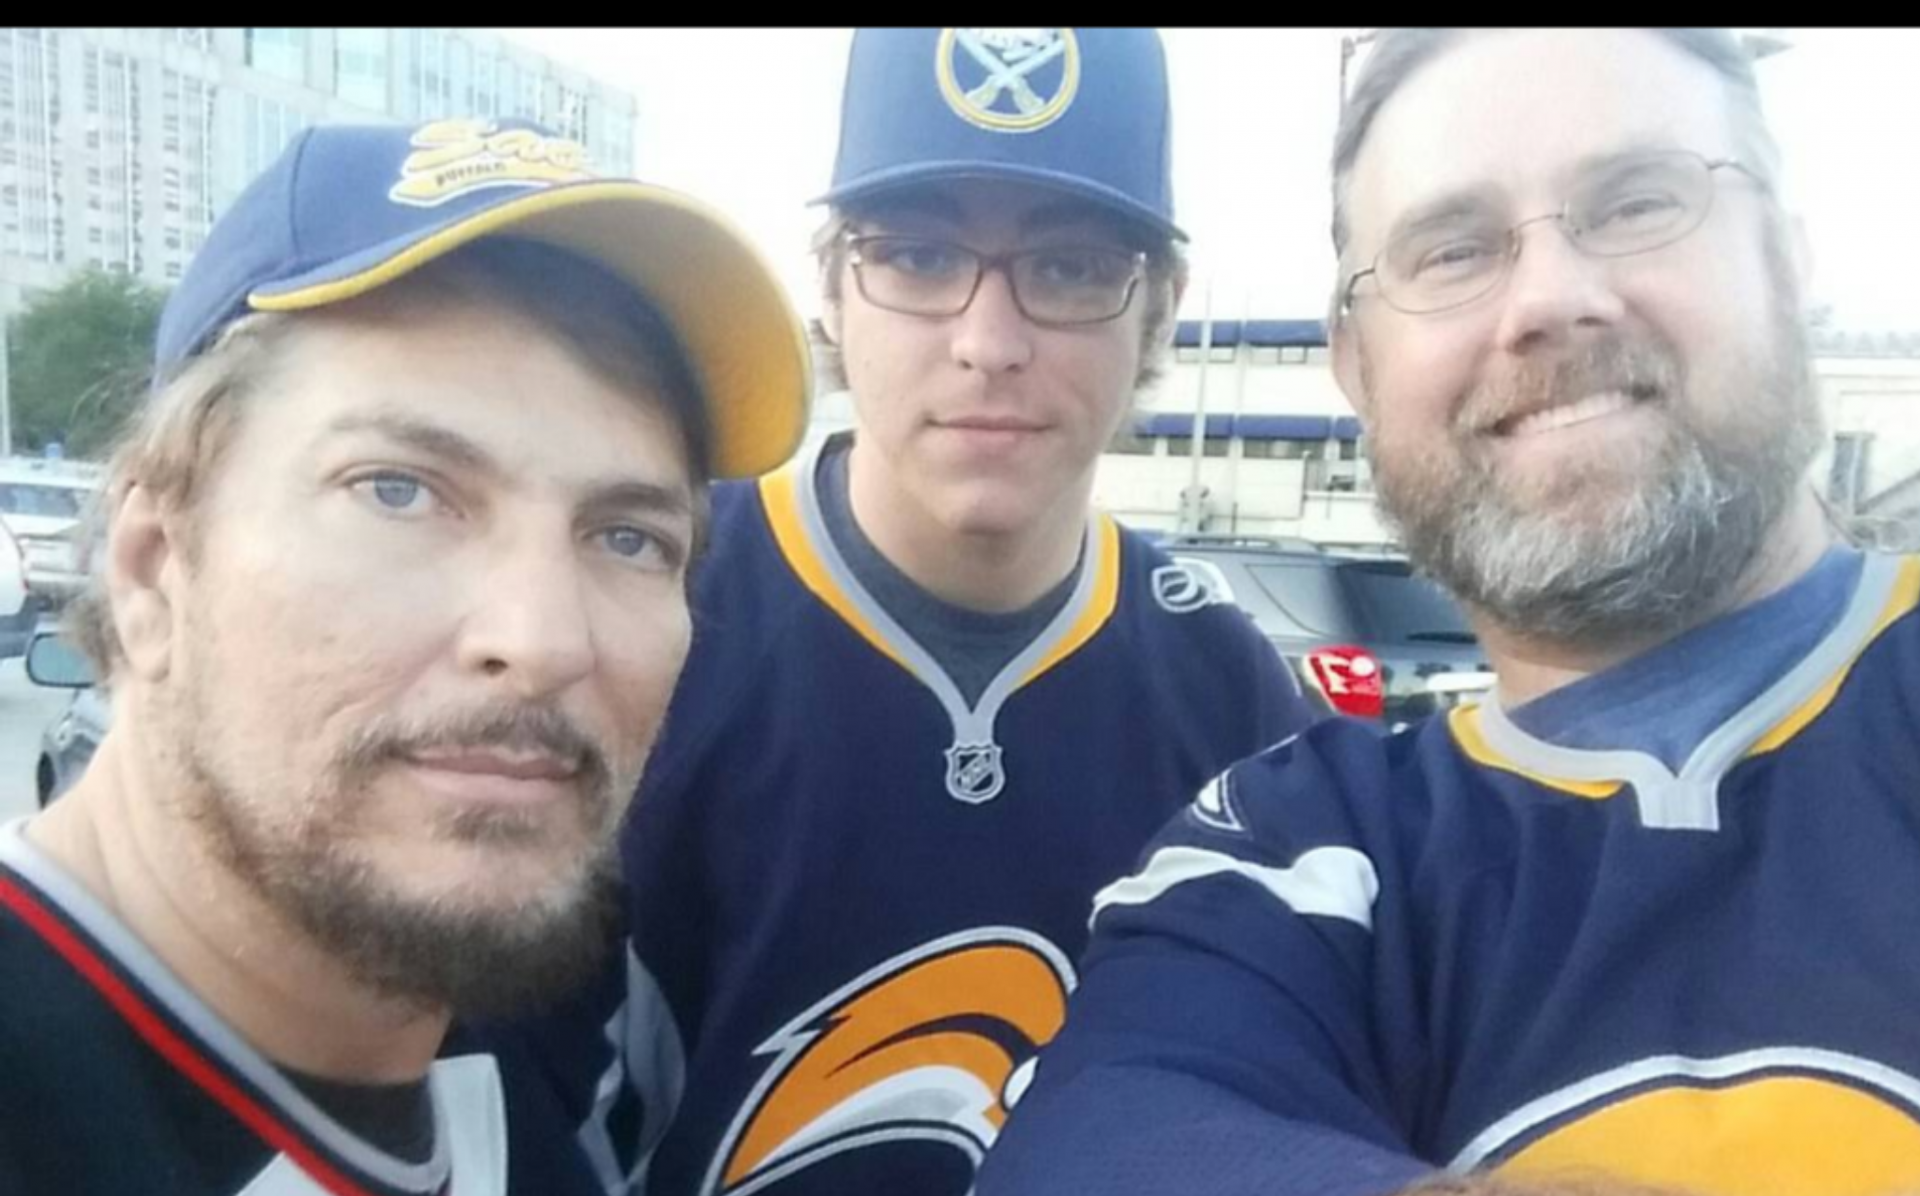 Trip to Tampa to see our Sabres play.